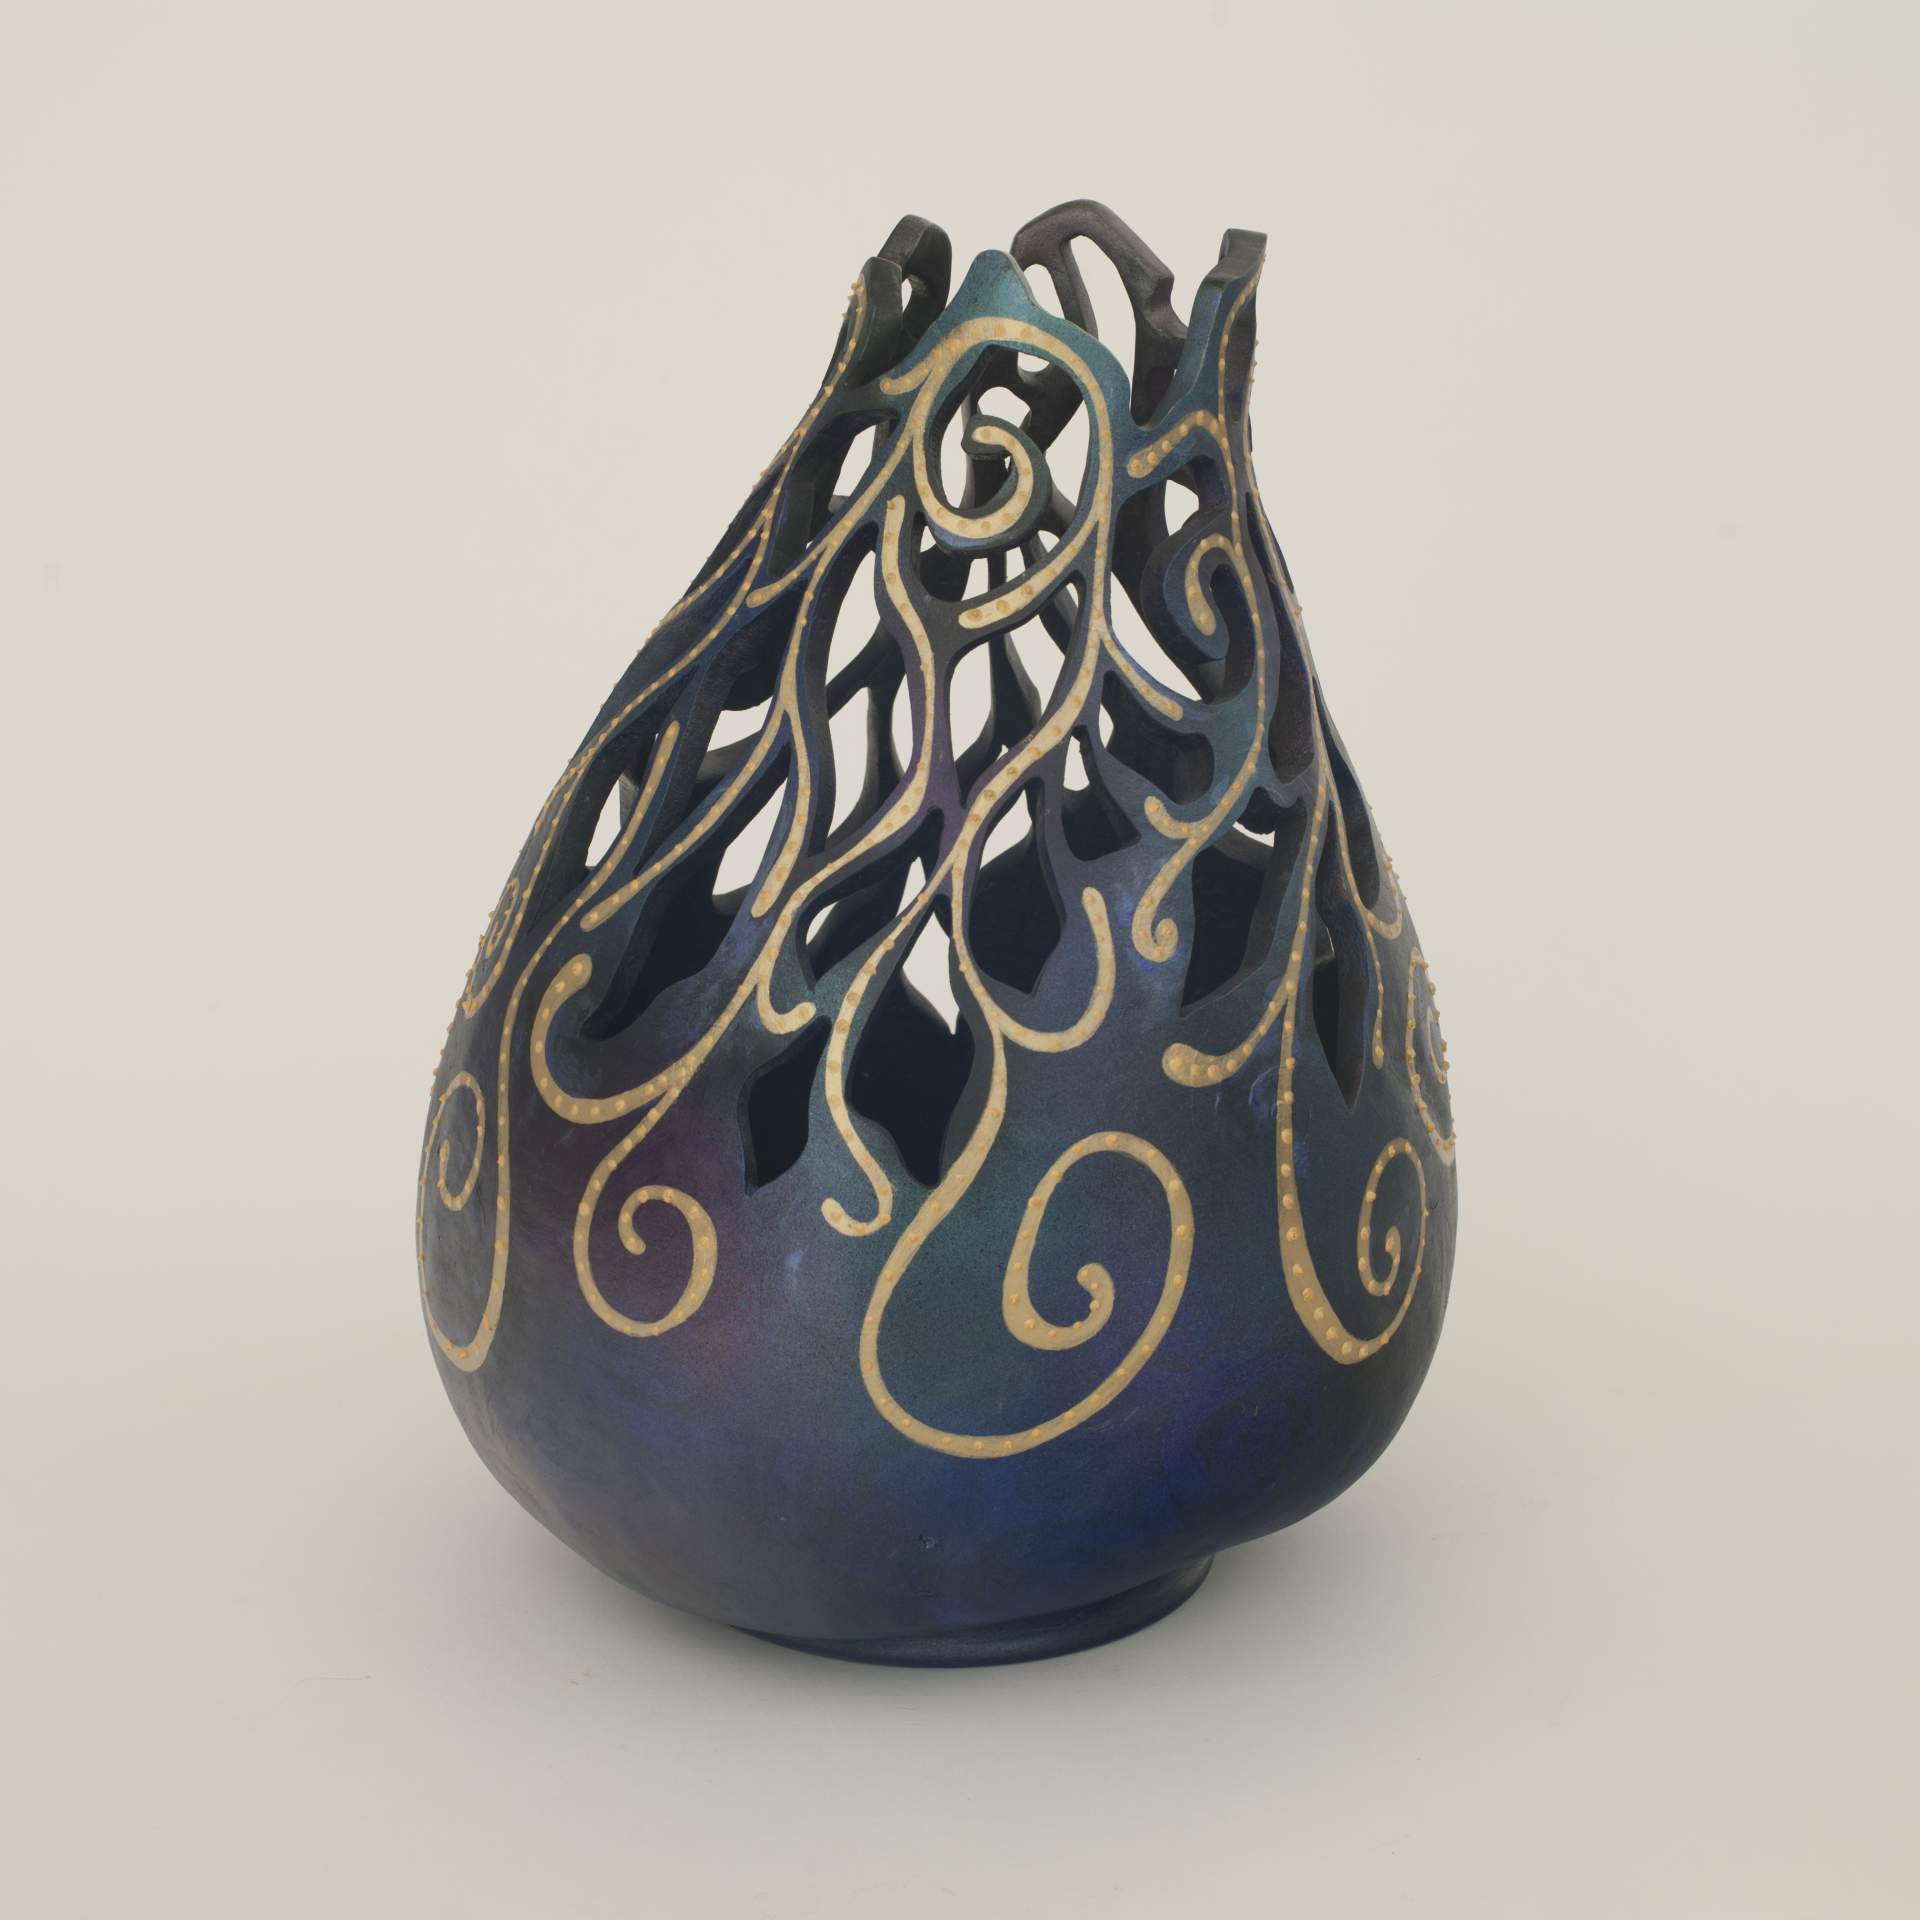 Carved and painted vase